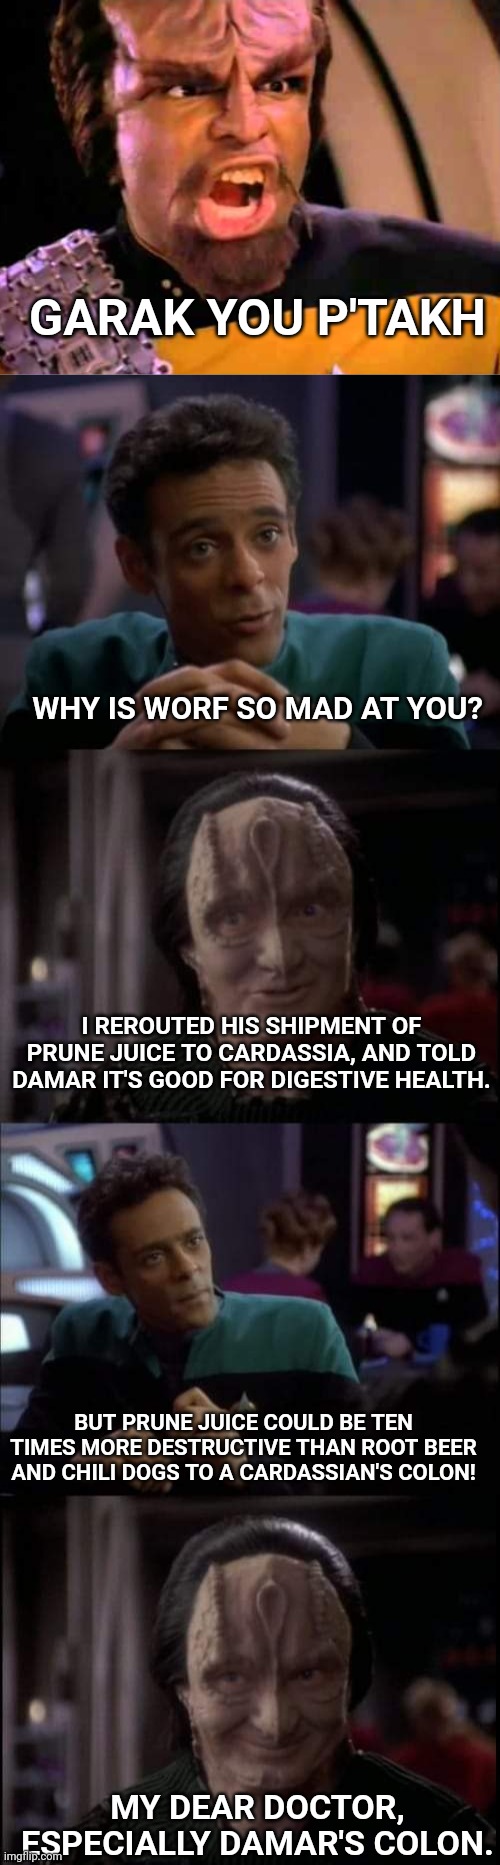 Especially the prune juice | GARAK YOU P'TAKH; WHY IS WORF SO MAD AT YOU? I REROUTED HIS SHIPMENT OF PRUNE JUICE TO CARDASSIA, AND TOLD DAMAR IT'S GOOD FOR DIGESTIVE HEALTH. BUT PRUNE JUICE COULD BE TEN TIMES MORE DESTRUCTIVE THAN ROOT BEER AND CHILI DOGS TO A CARDASSIAN'S COLON! MY DEAR DOCTOR, ESPECIALLY DAMAR'S COLON. | image tagged in especially the ______,worf,garak | made w/ Imgflip meme maker